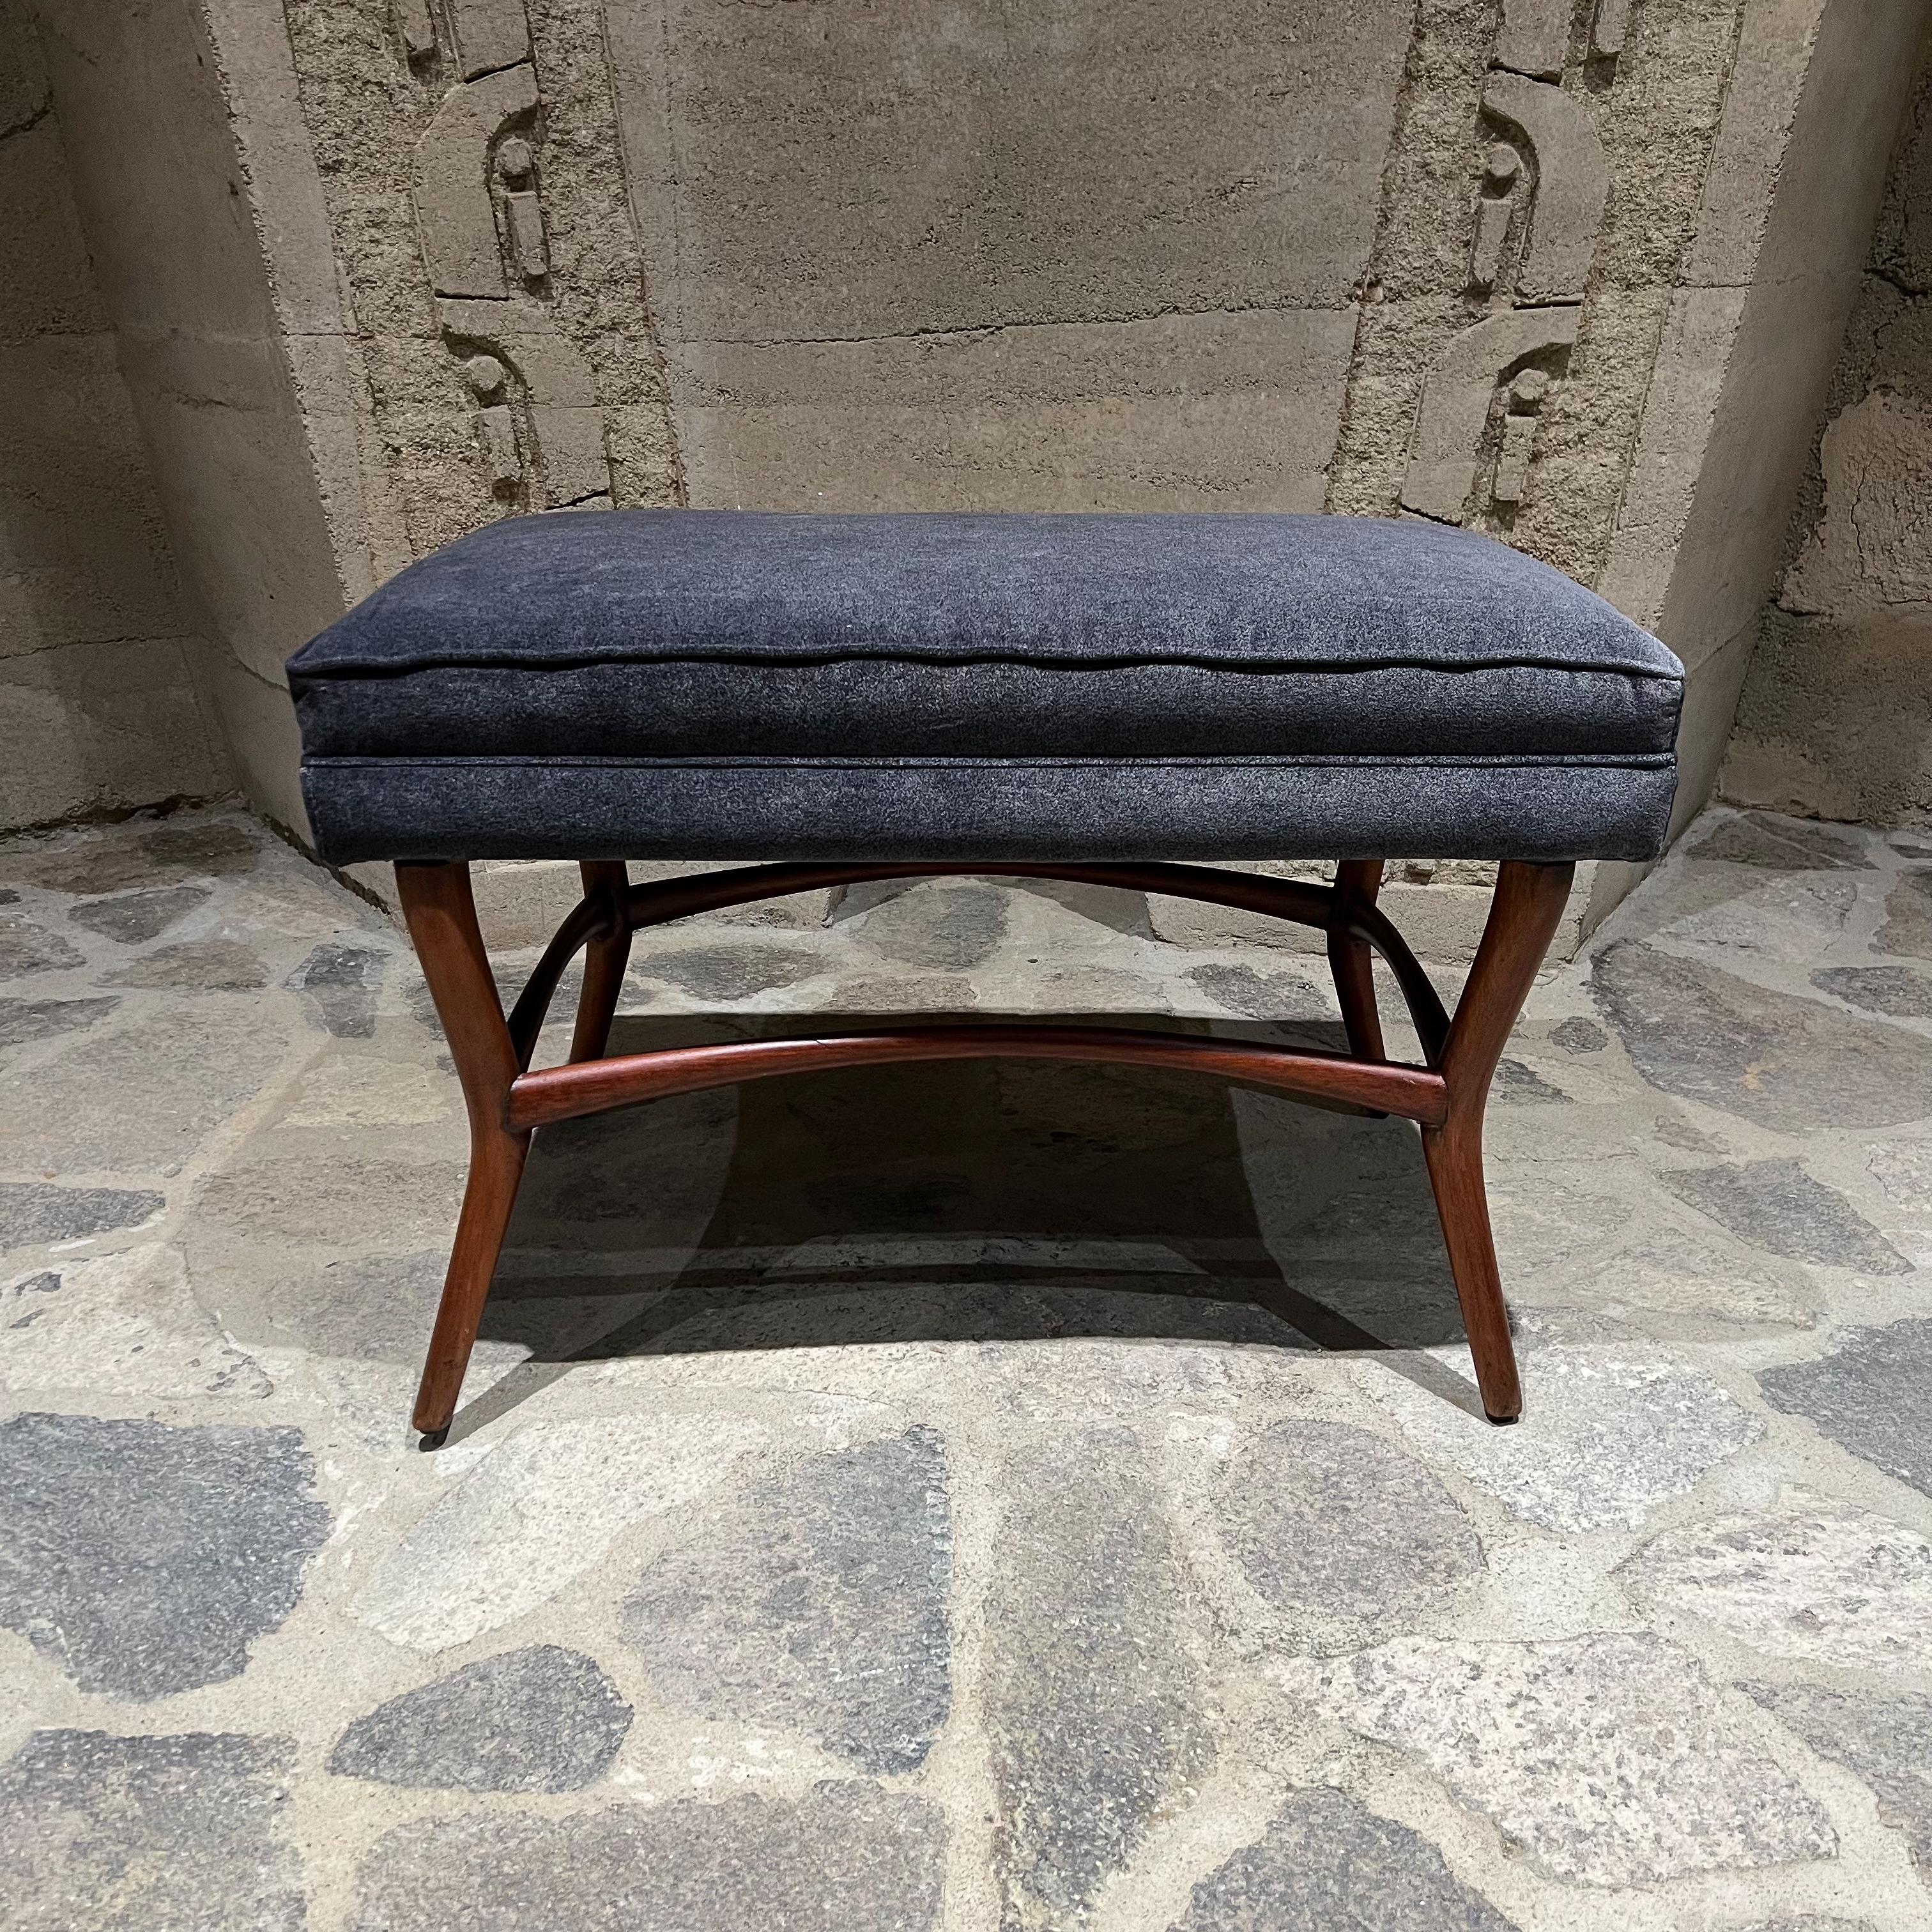 Mexican 1950s Modernist Bench in Mahogany New Cushioned Gray Seat from Mexico For Sale